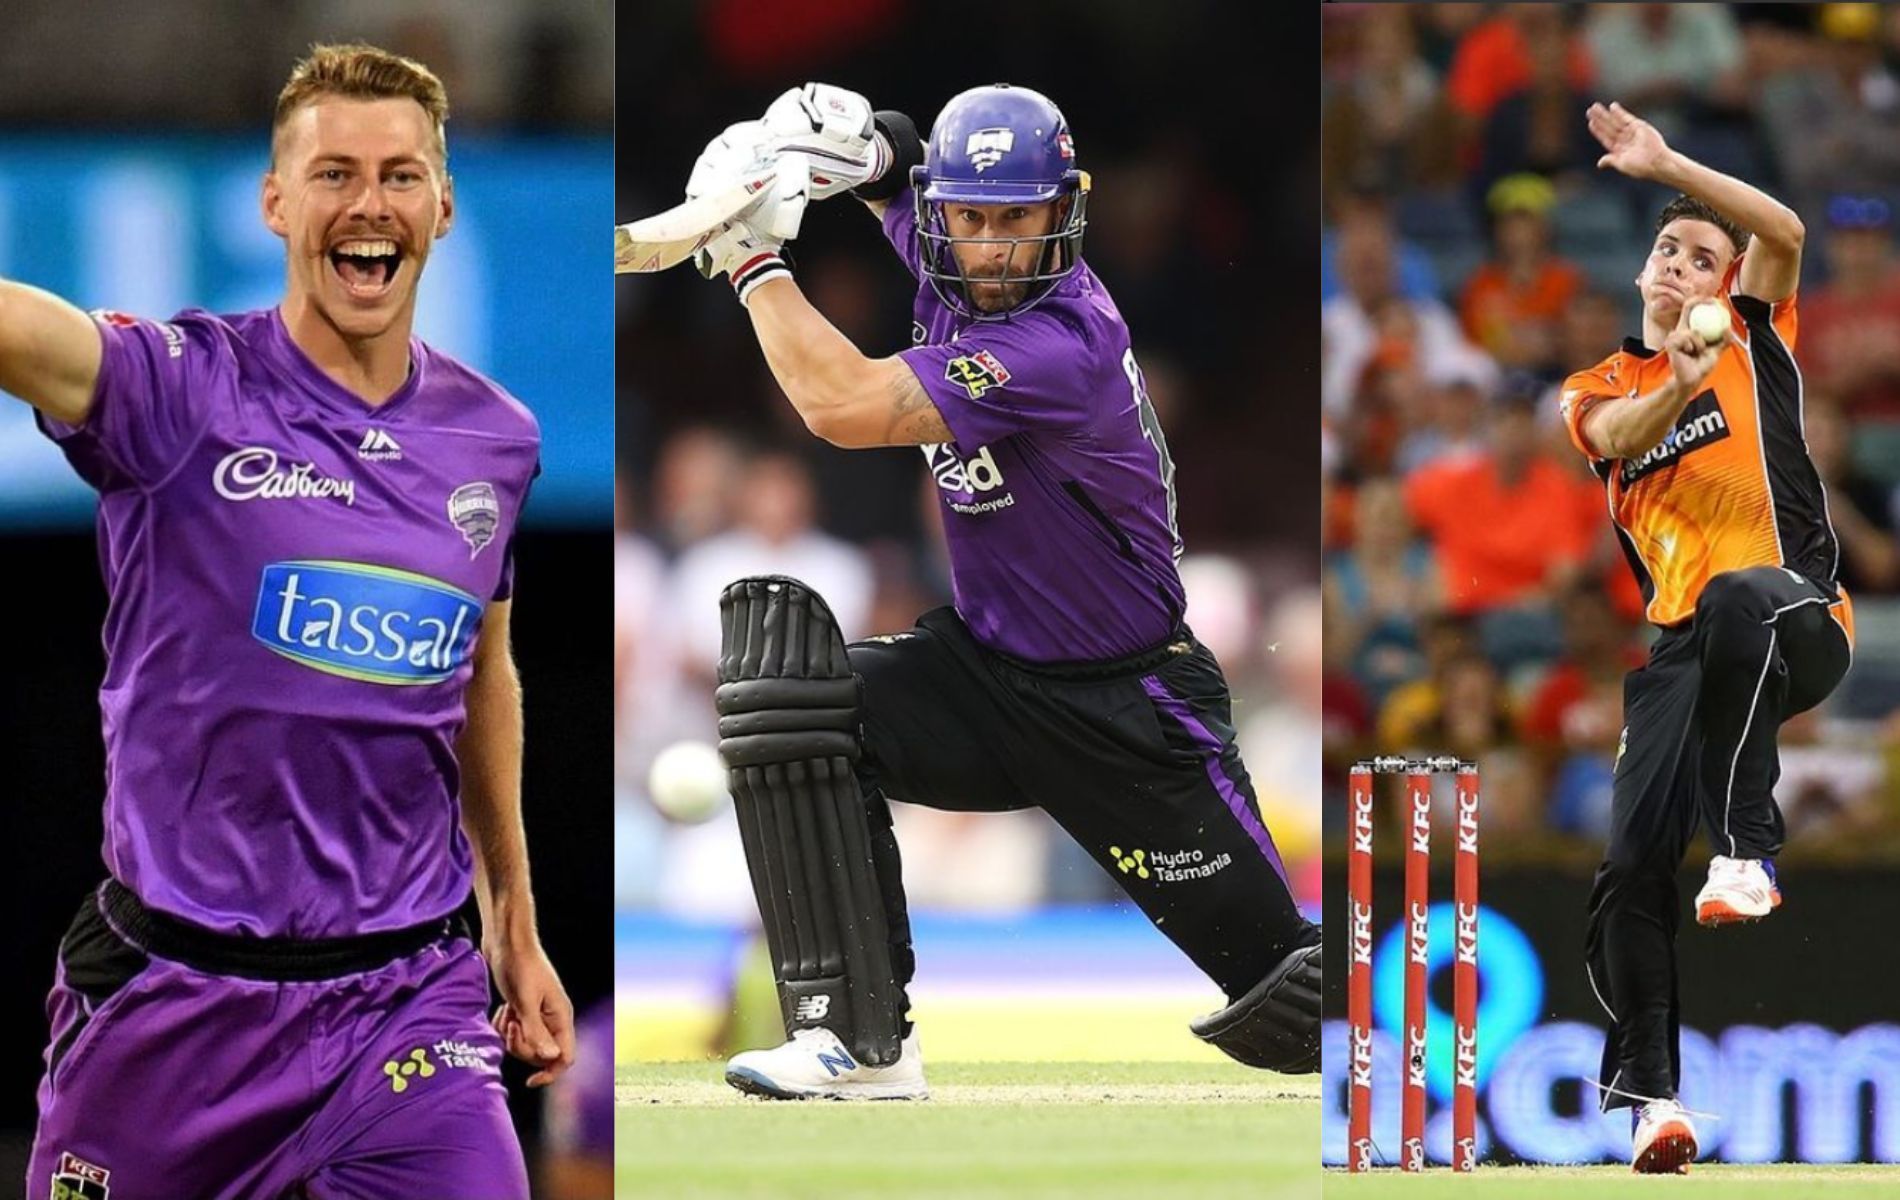 Australian players have always attracted attention in IPL auctions.